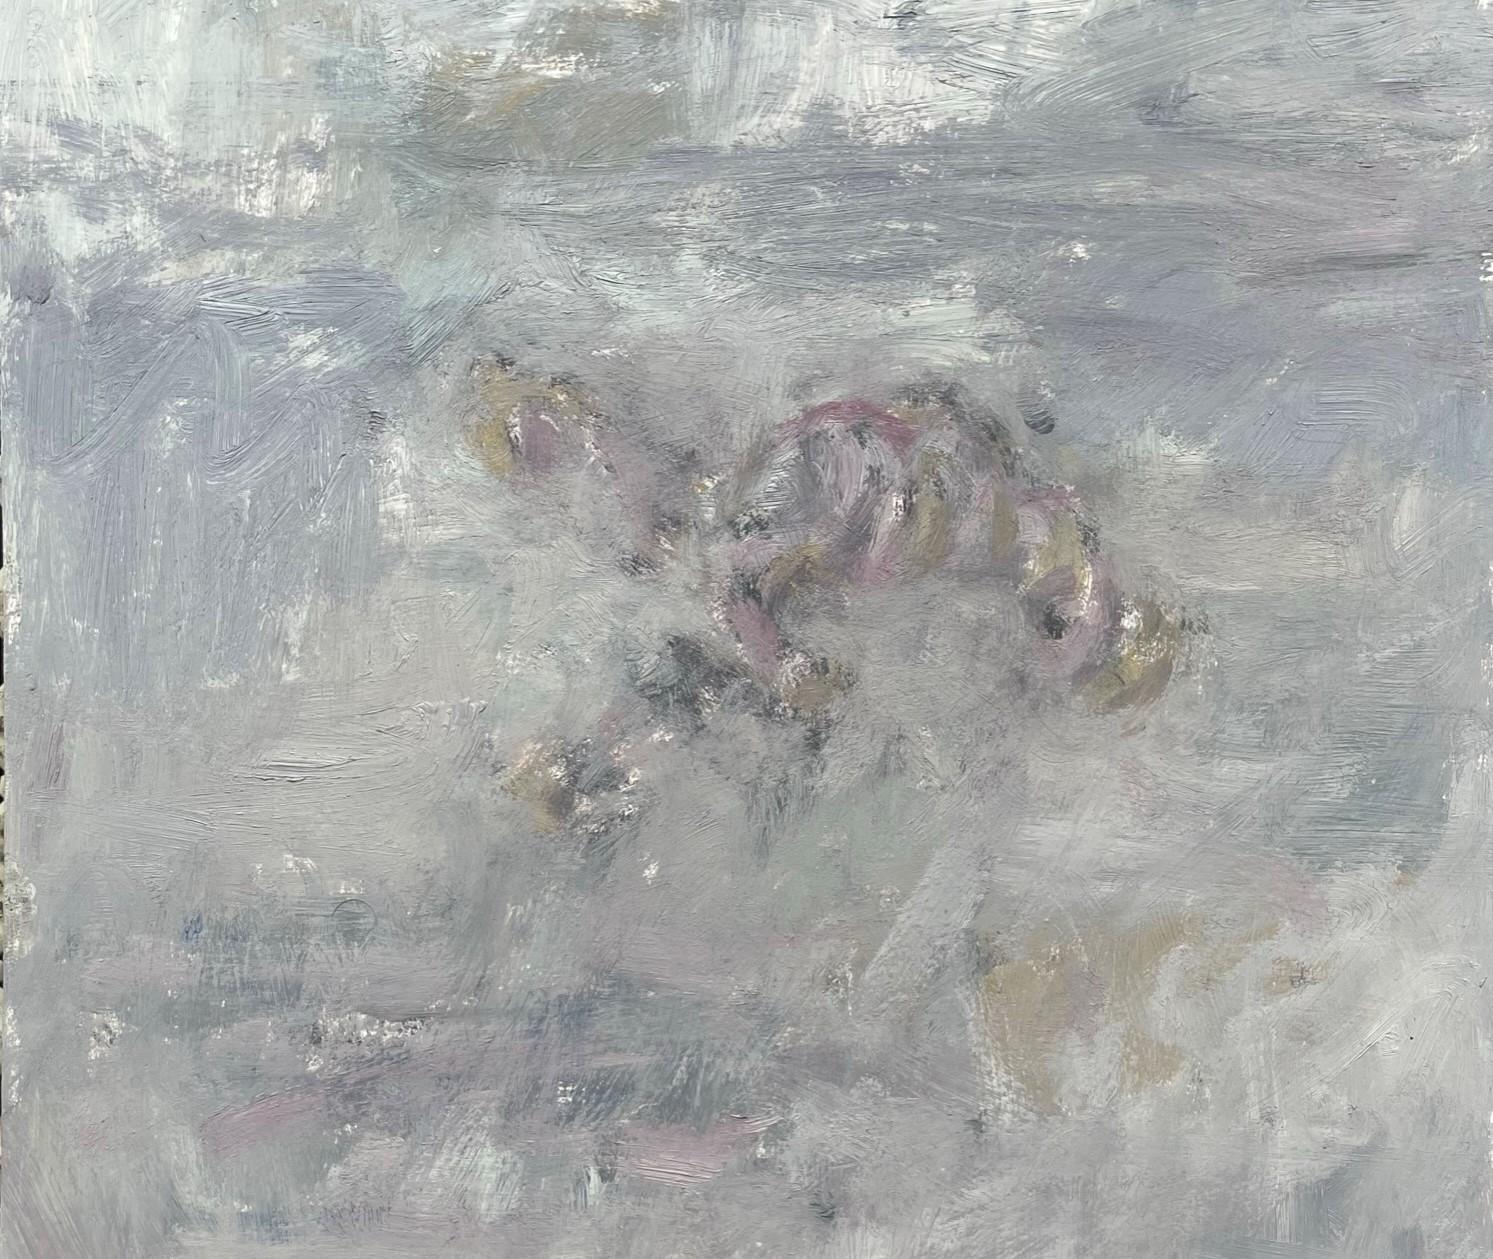 Remains (Body in the Field 16), 2022
oil on paper (signed on reverse)
16 17/32 H x 11 13/16 W in.
42 H x 30 W cm

Zsolt Berszán embodies in his works the dissolution of the human body through the prism of the fragment, the body in pieces, and the